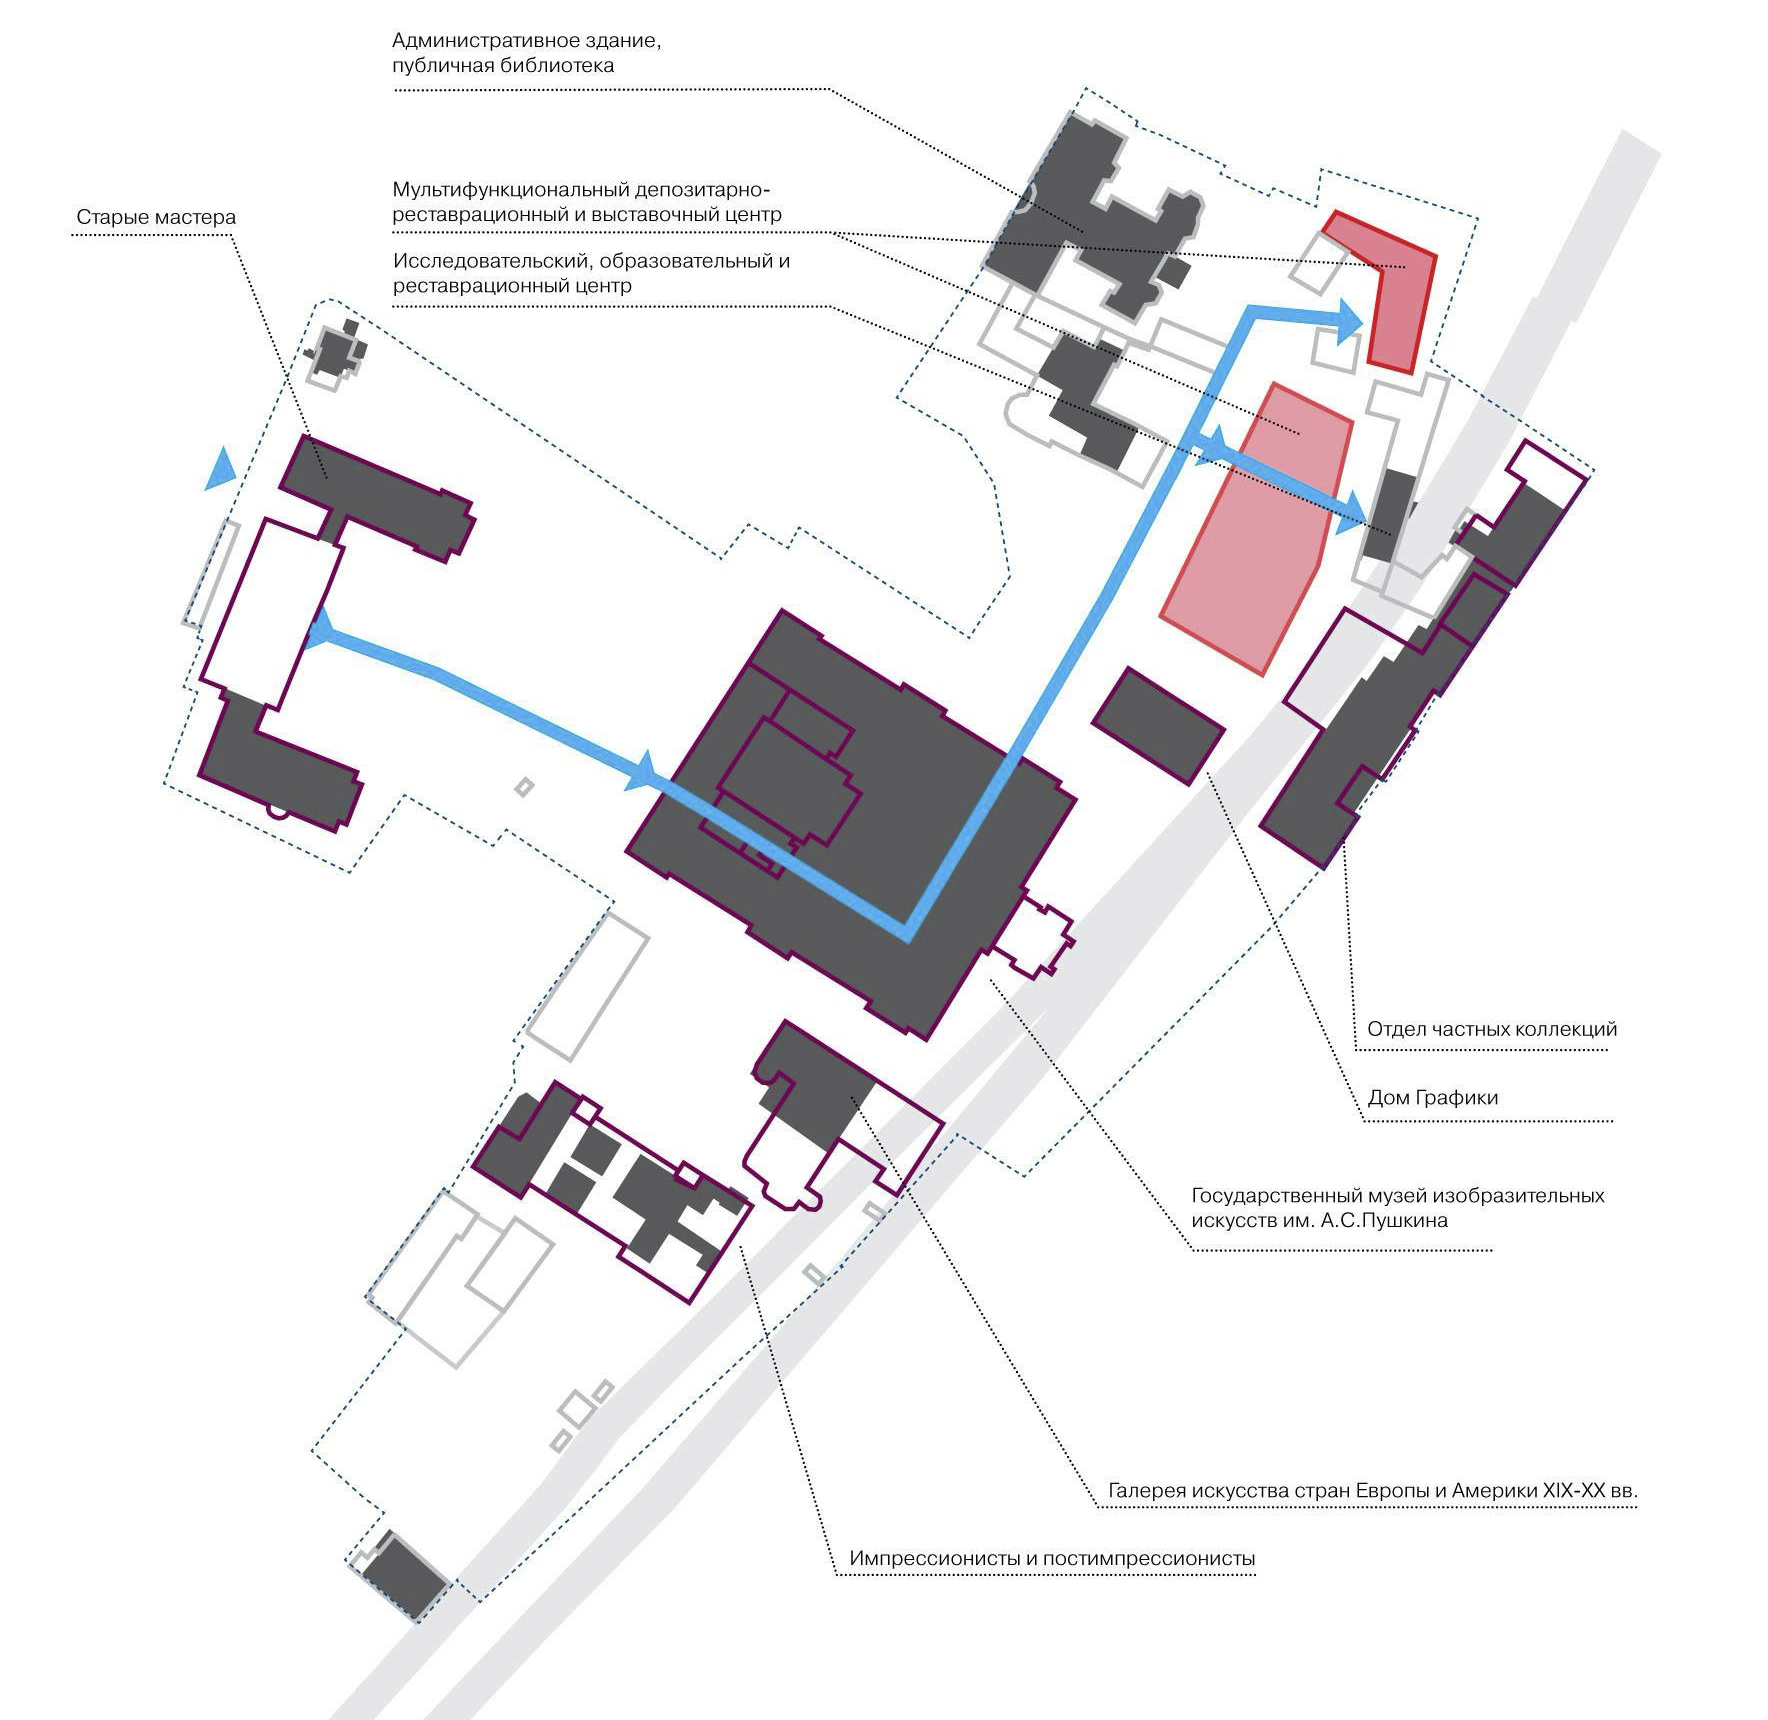 master plan for the development of the Pushkin Museum cluster